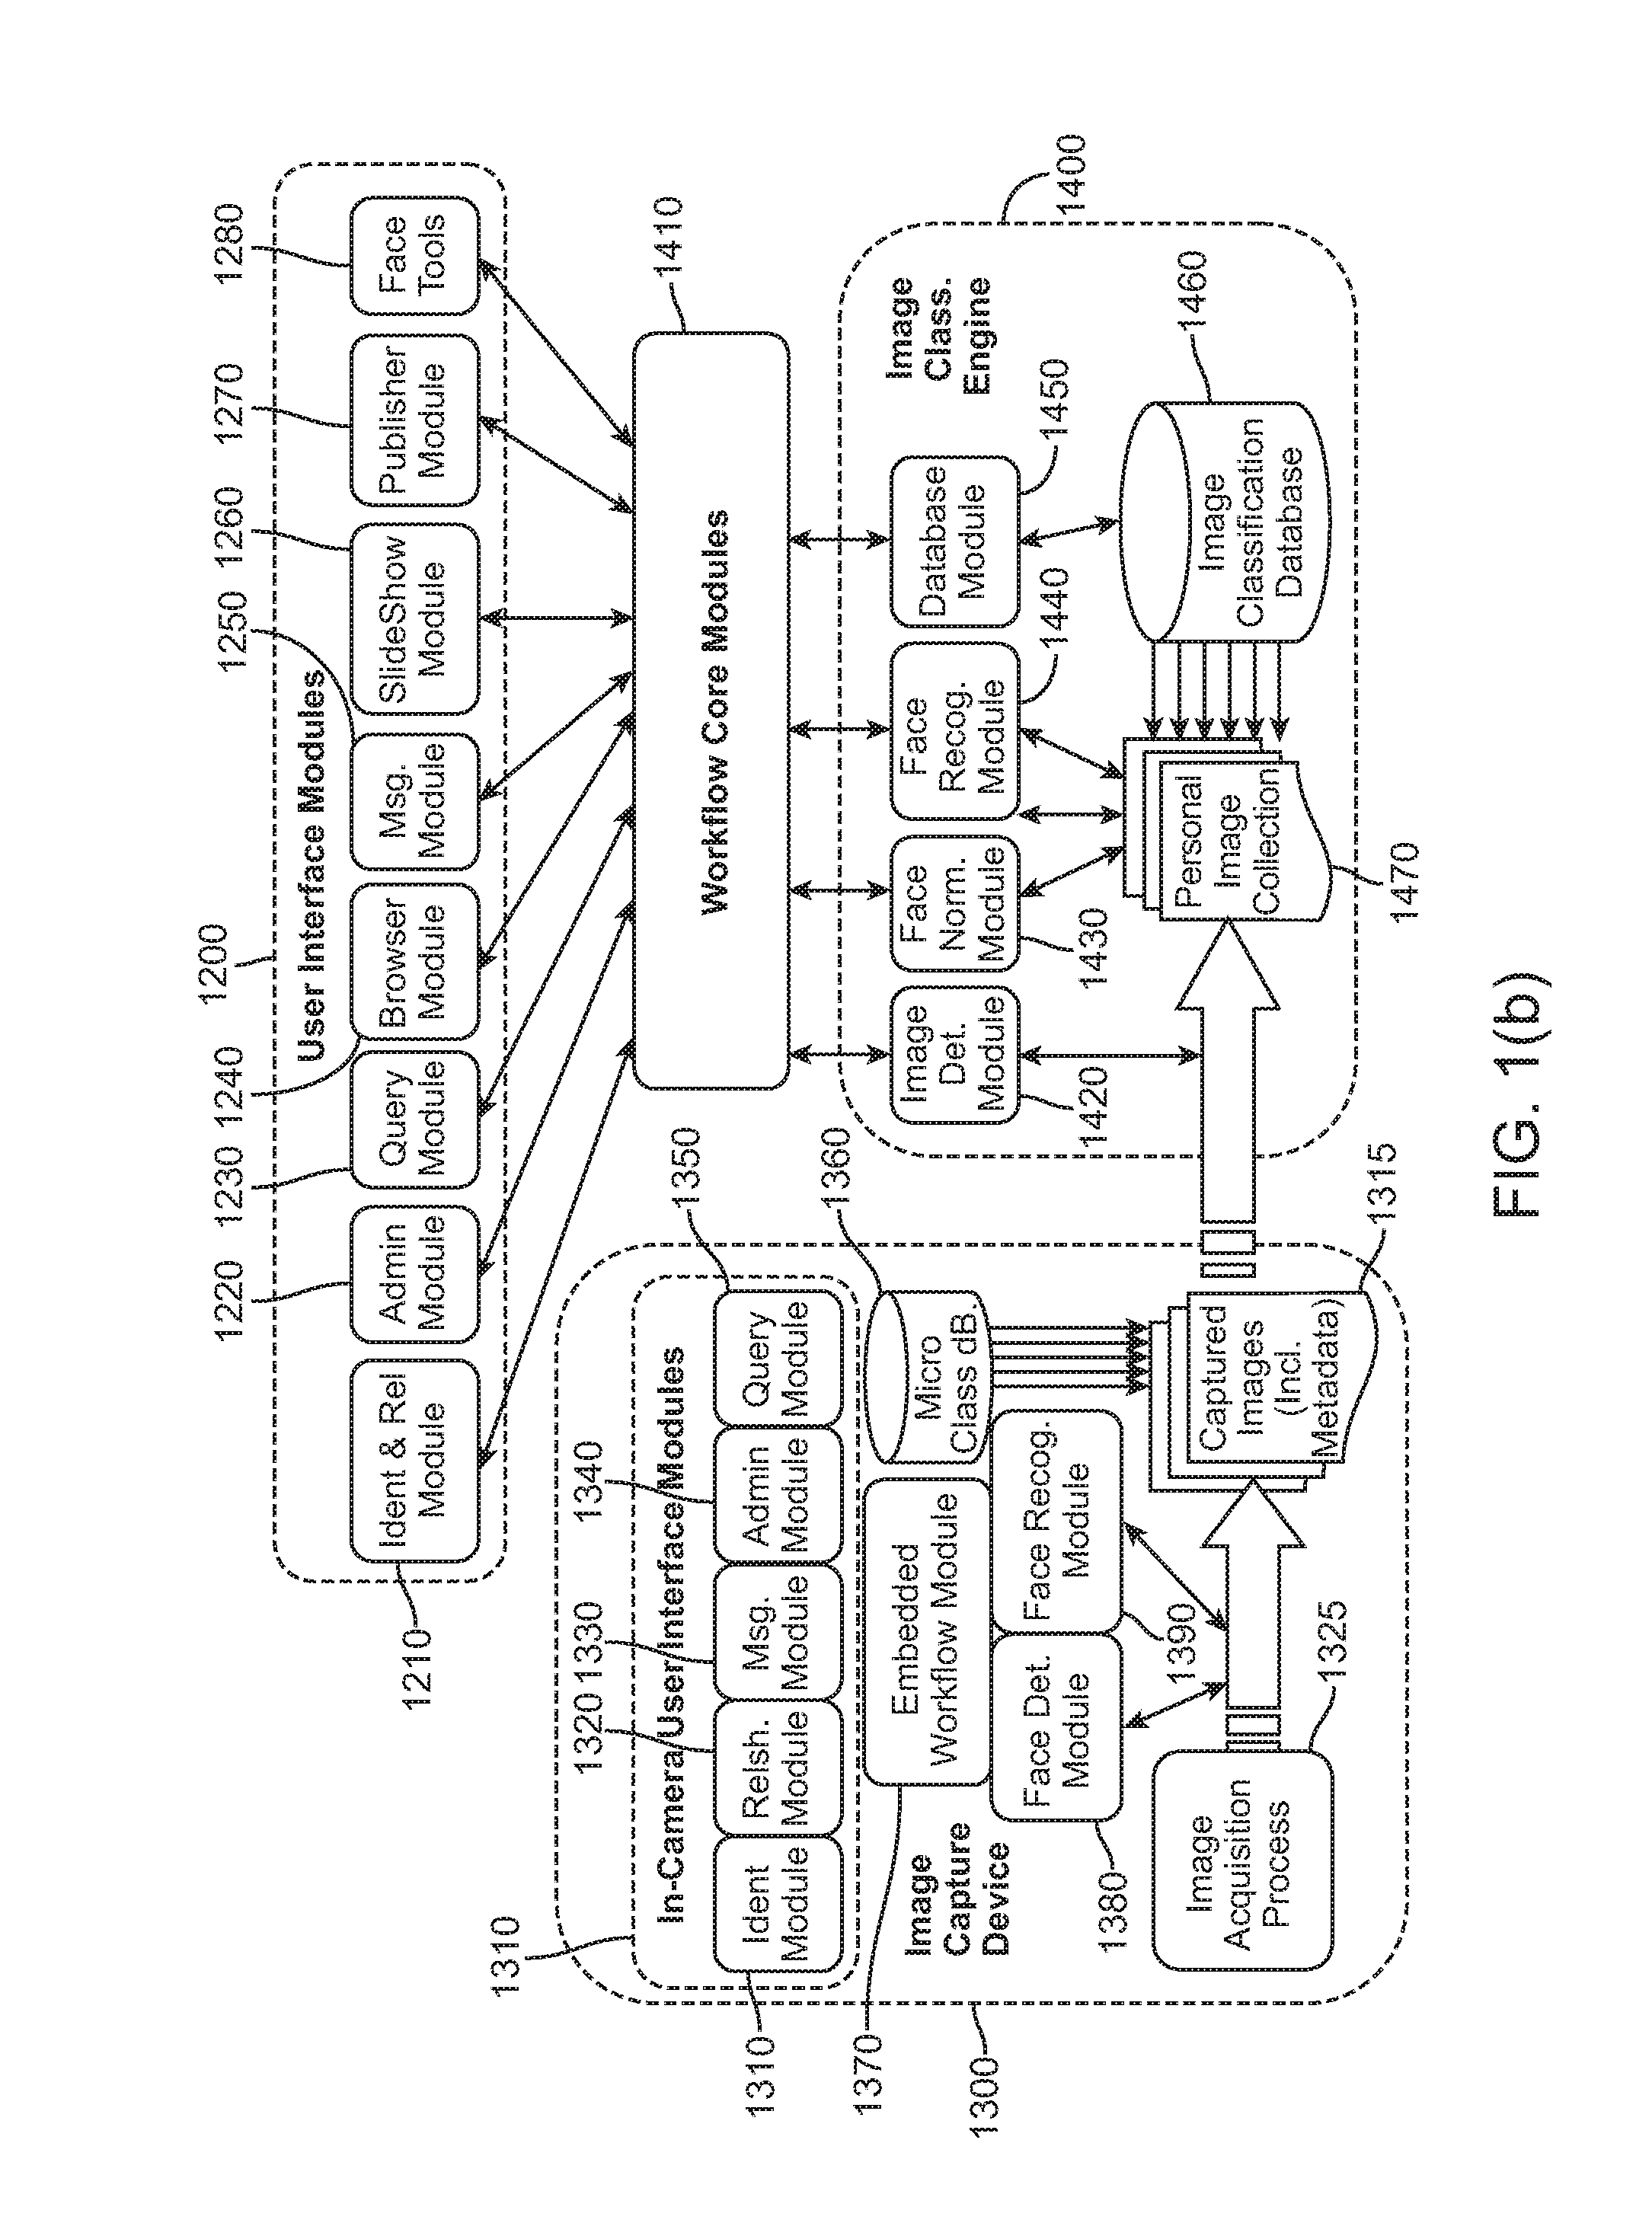 Classification and organization of consumer digital images using workflow, and face detection and recognition